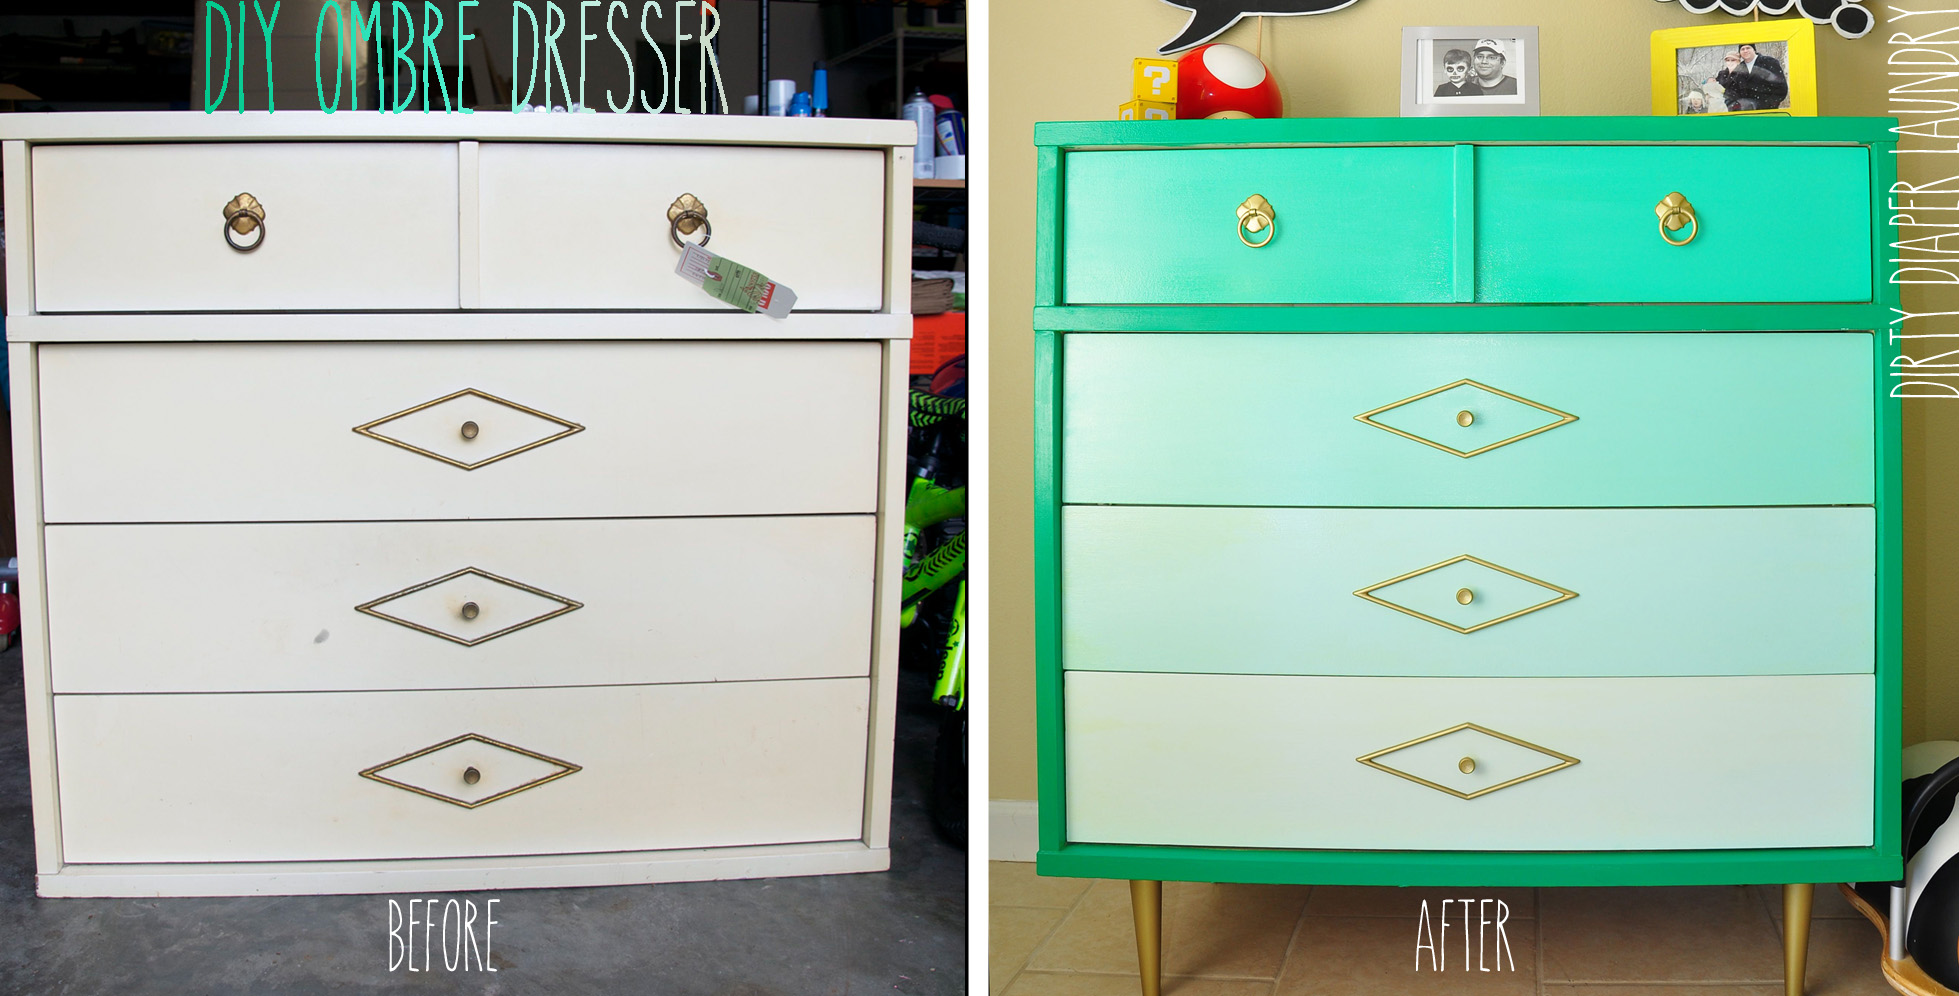 Ombré dresser before and after